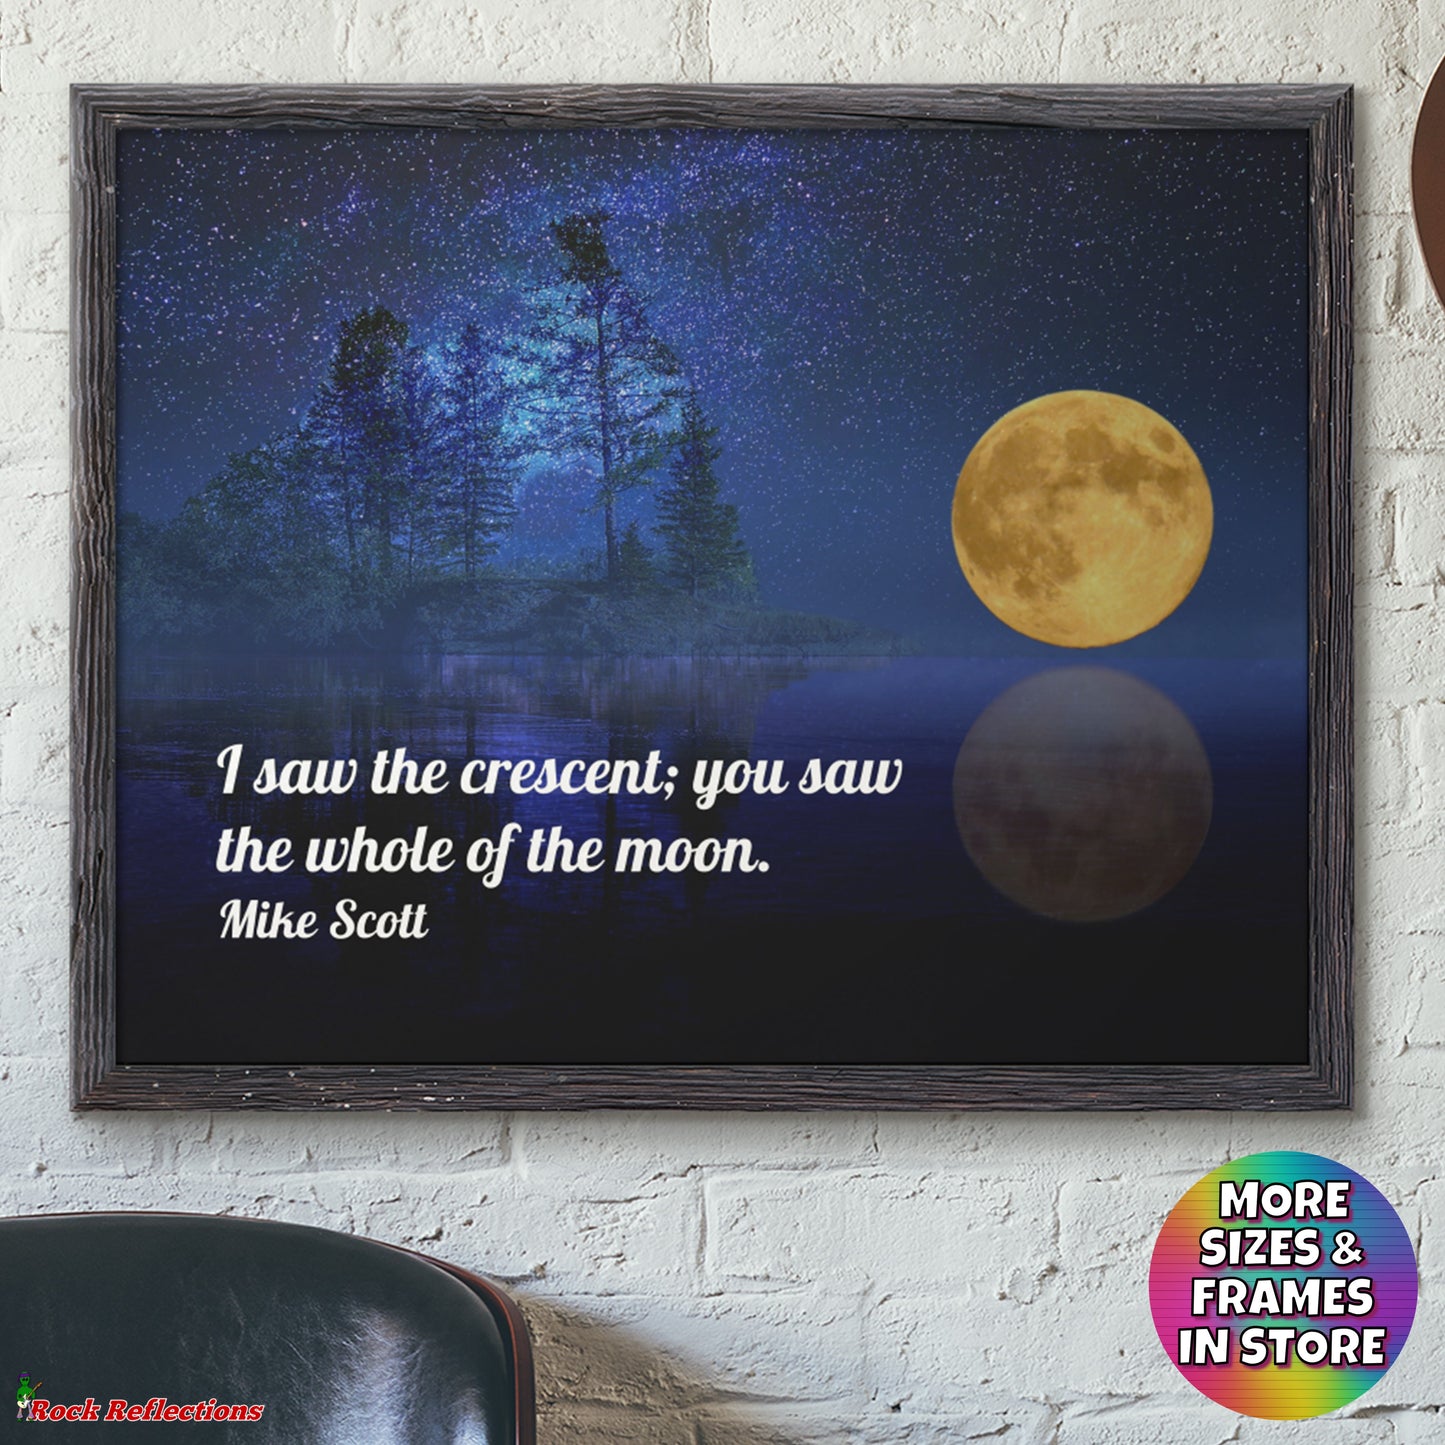 I Saw The Crescent - Music Quote Framed Print Gelato